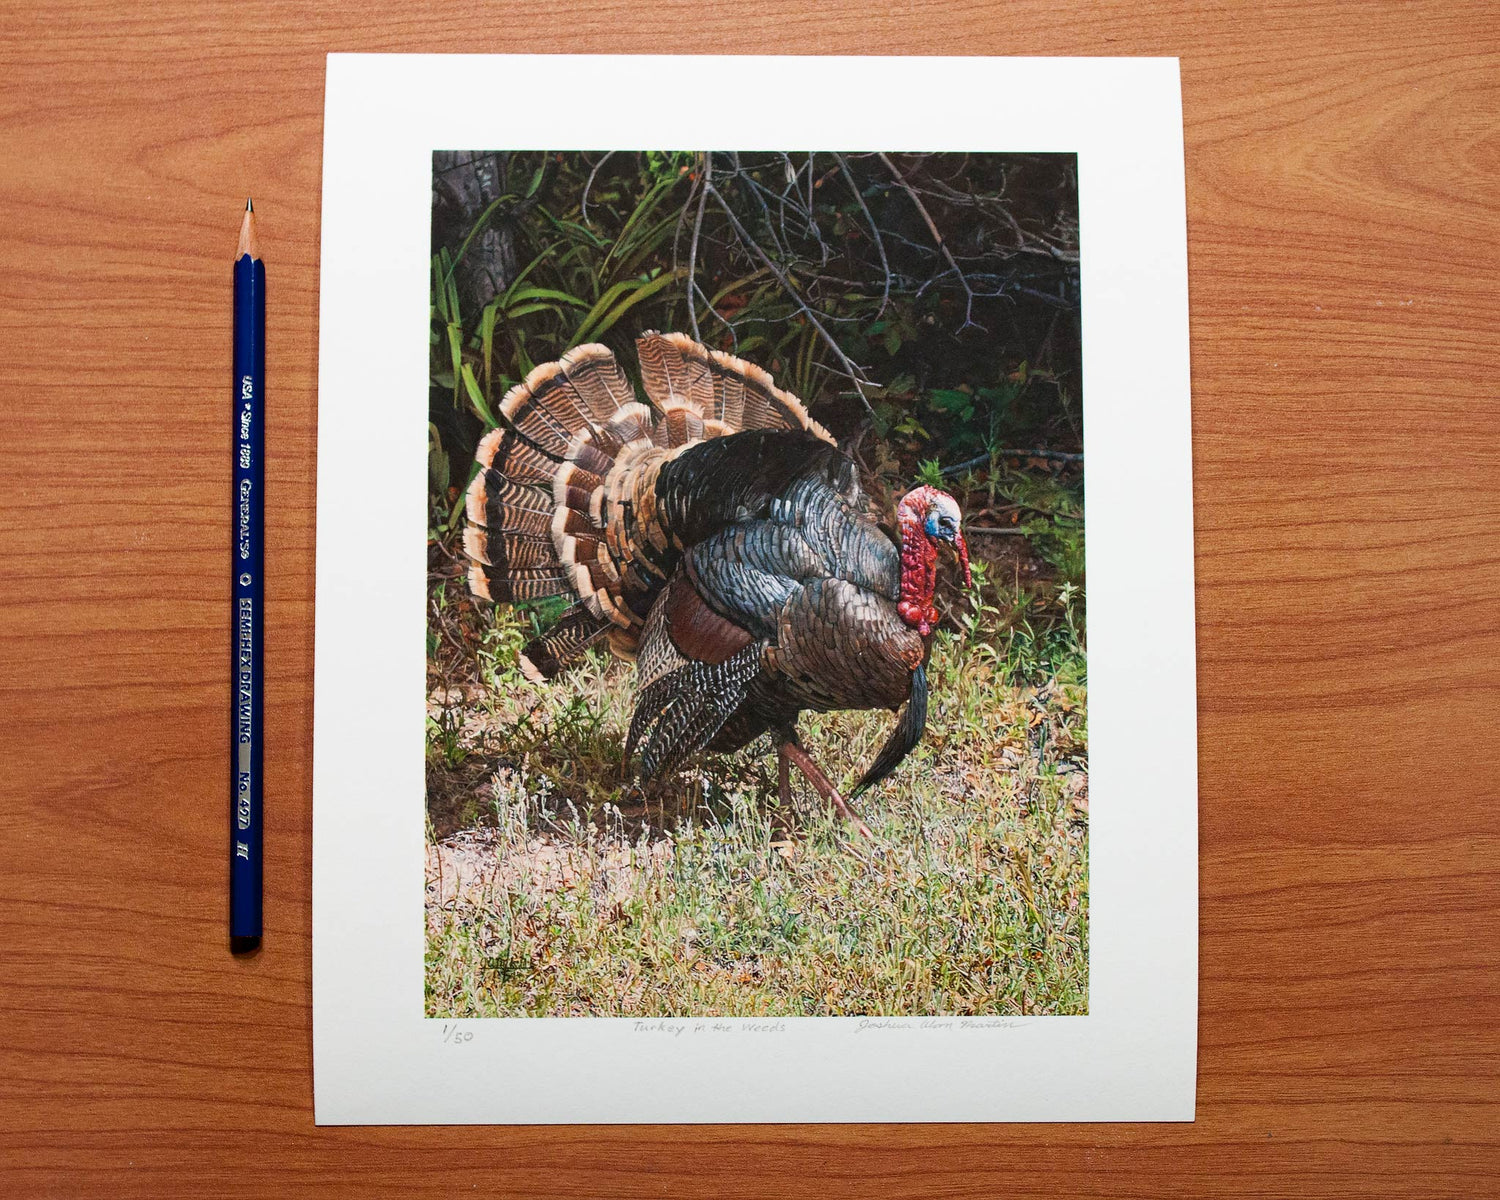 Signed fine art print by artist Joshua Martin of Turkey in the Weeds.